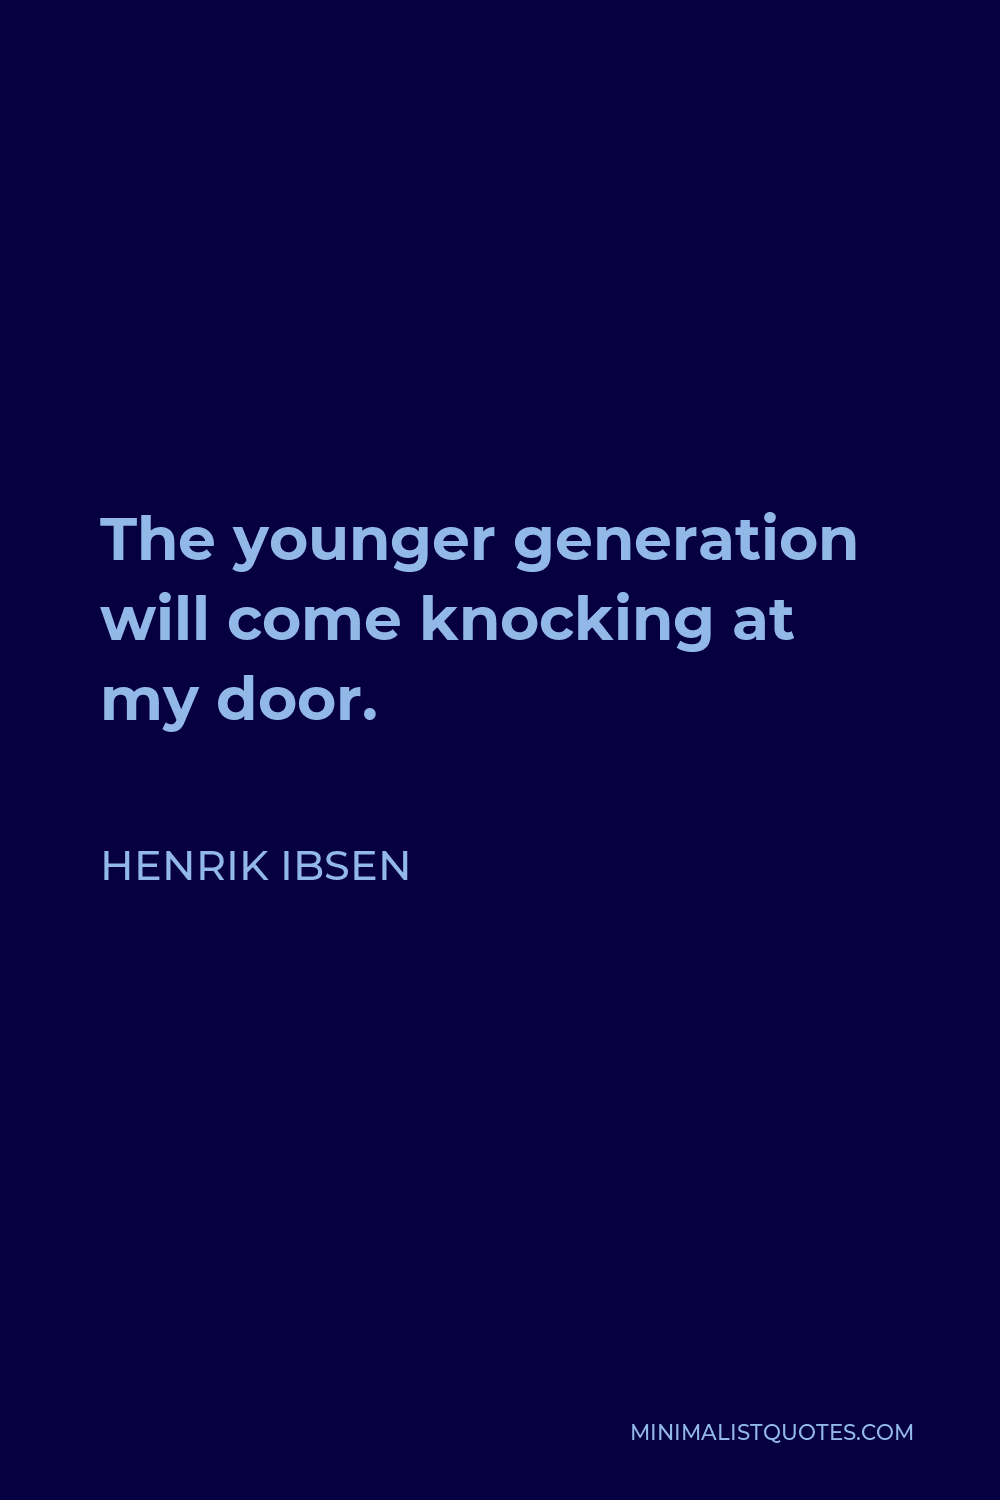 Henrik Ibsen Quote - The younger generation will come knocking at my door.